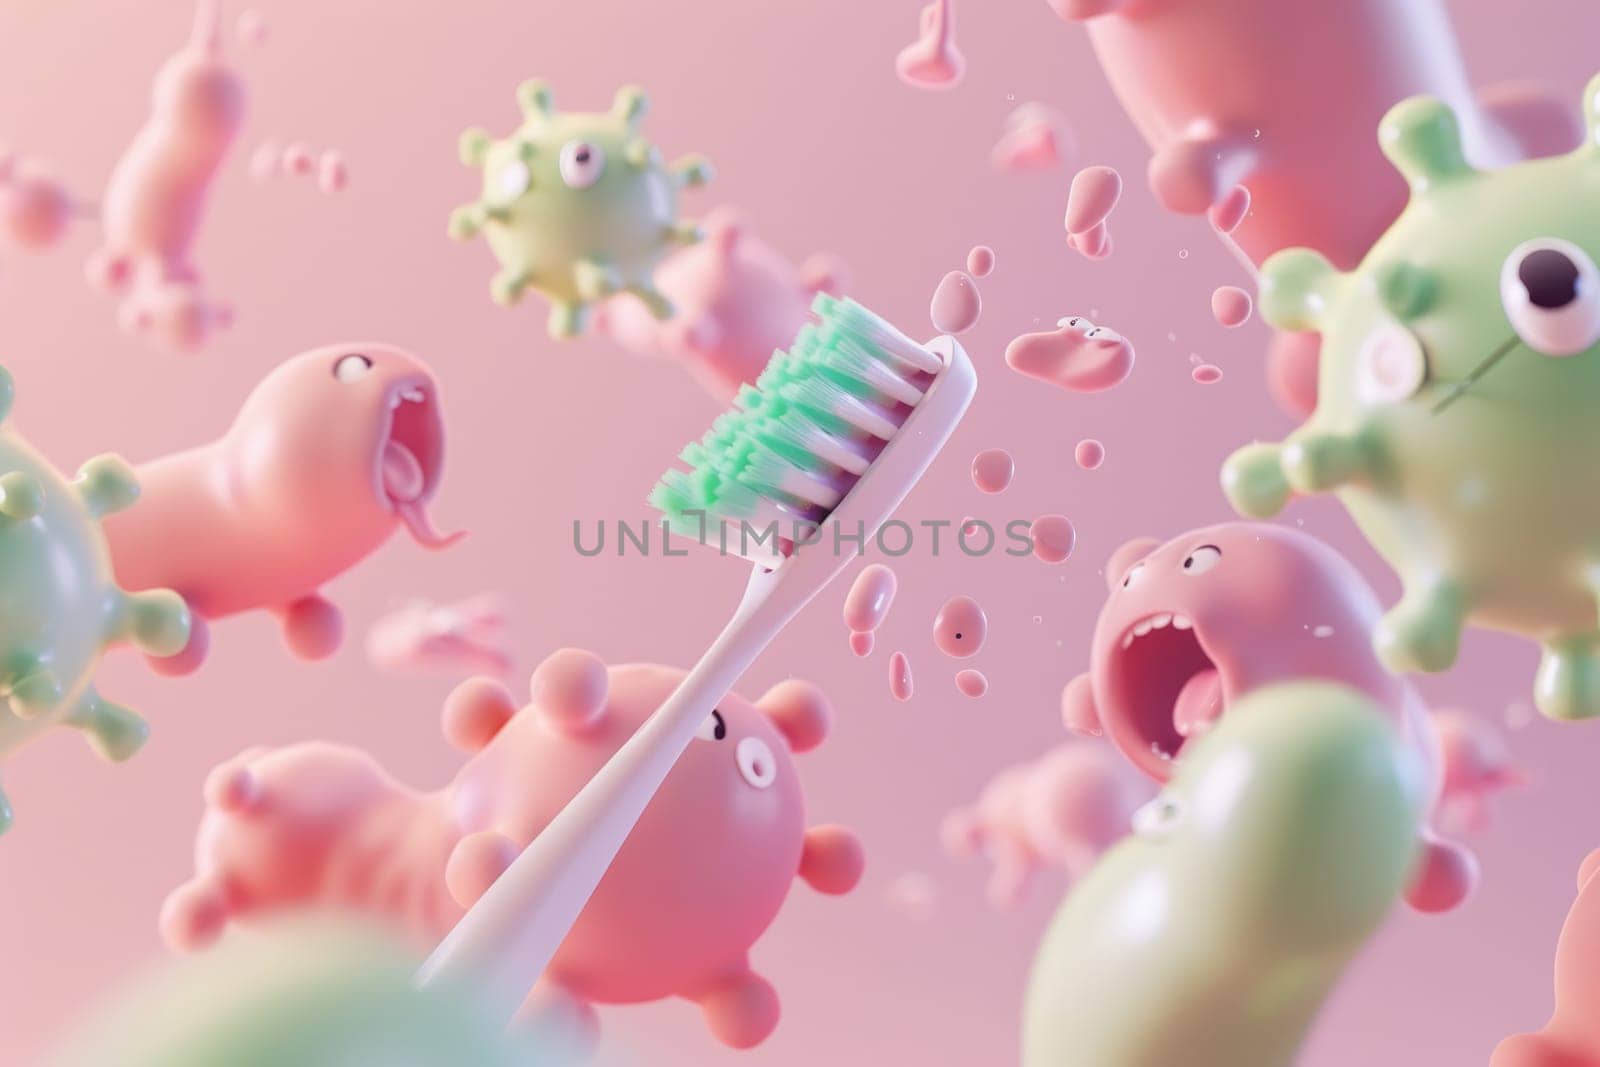 A minimalist 3D scene featuring a charming toothbrush heroically escaping a horde of cartoon. by AI generated image.